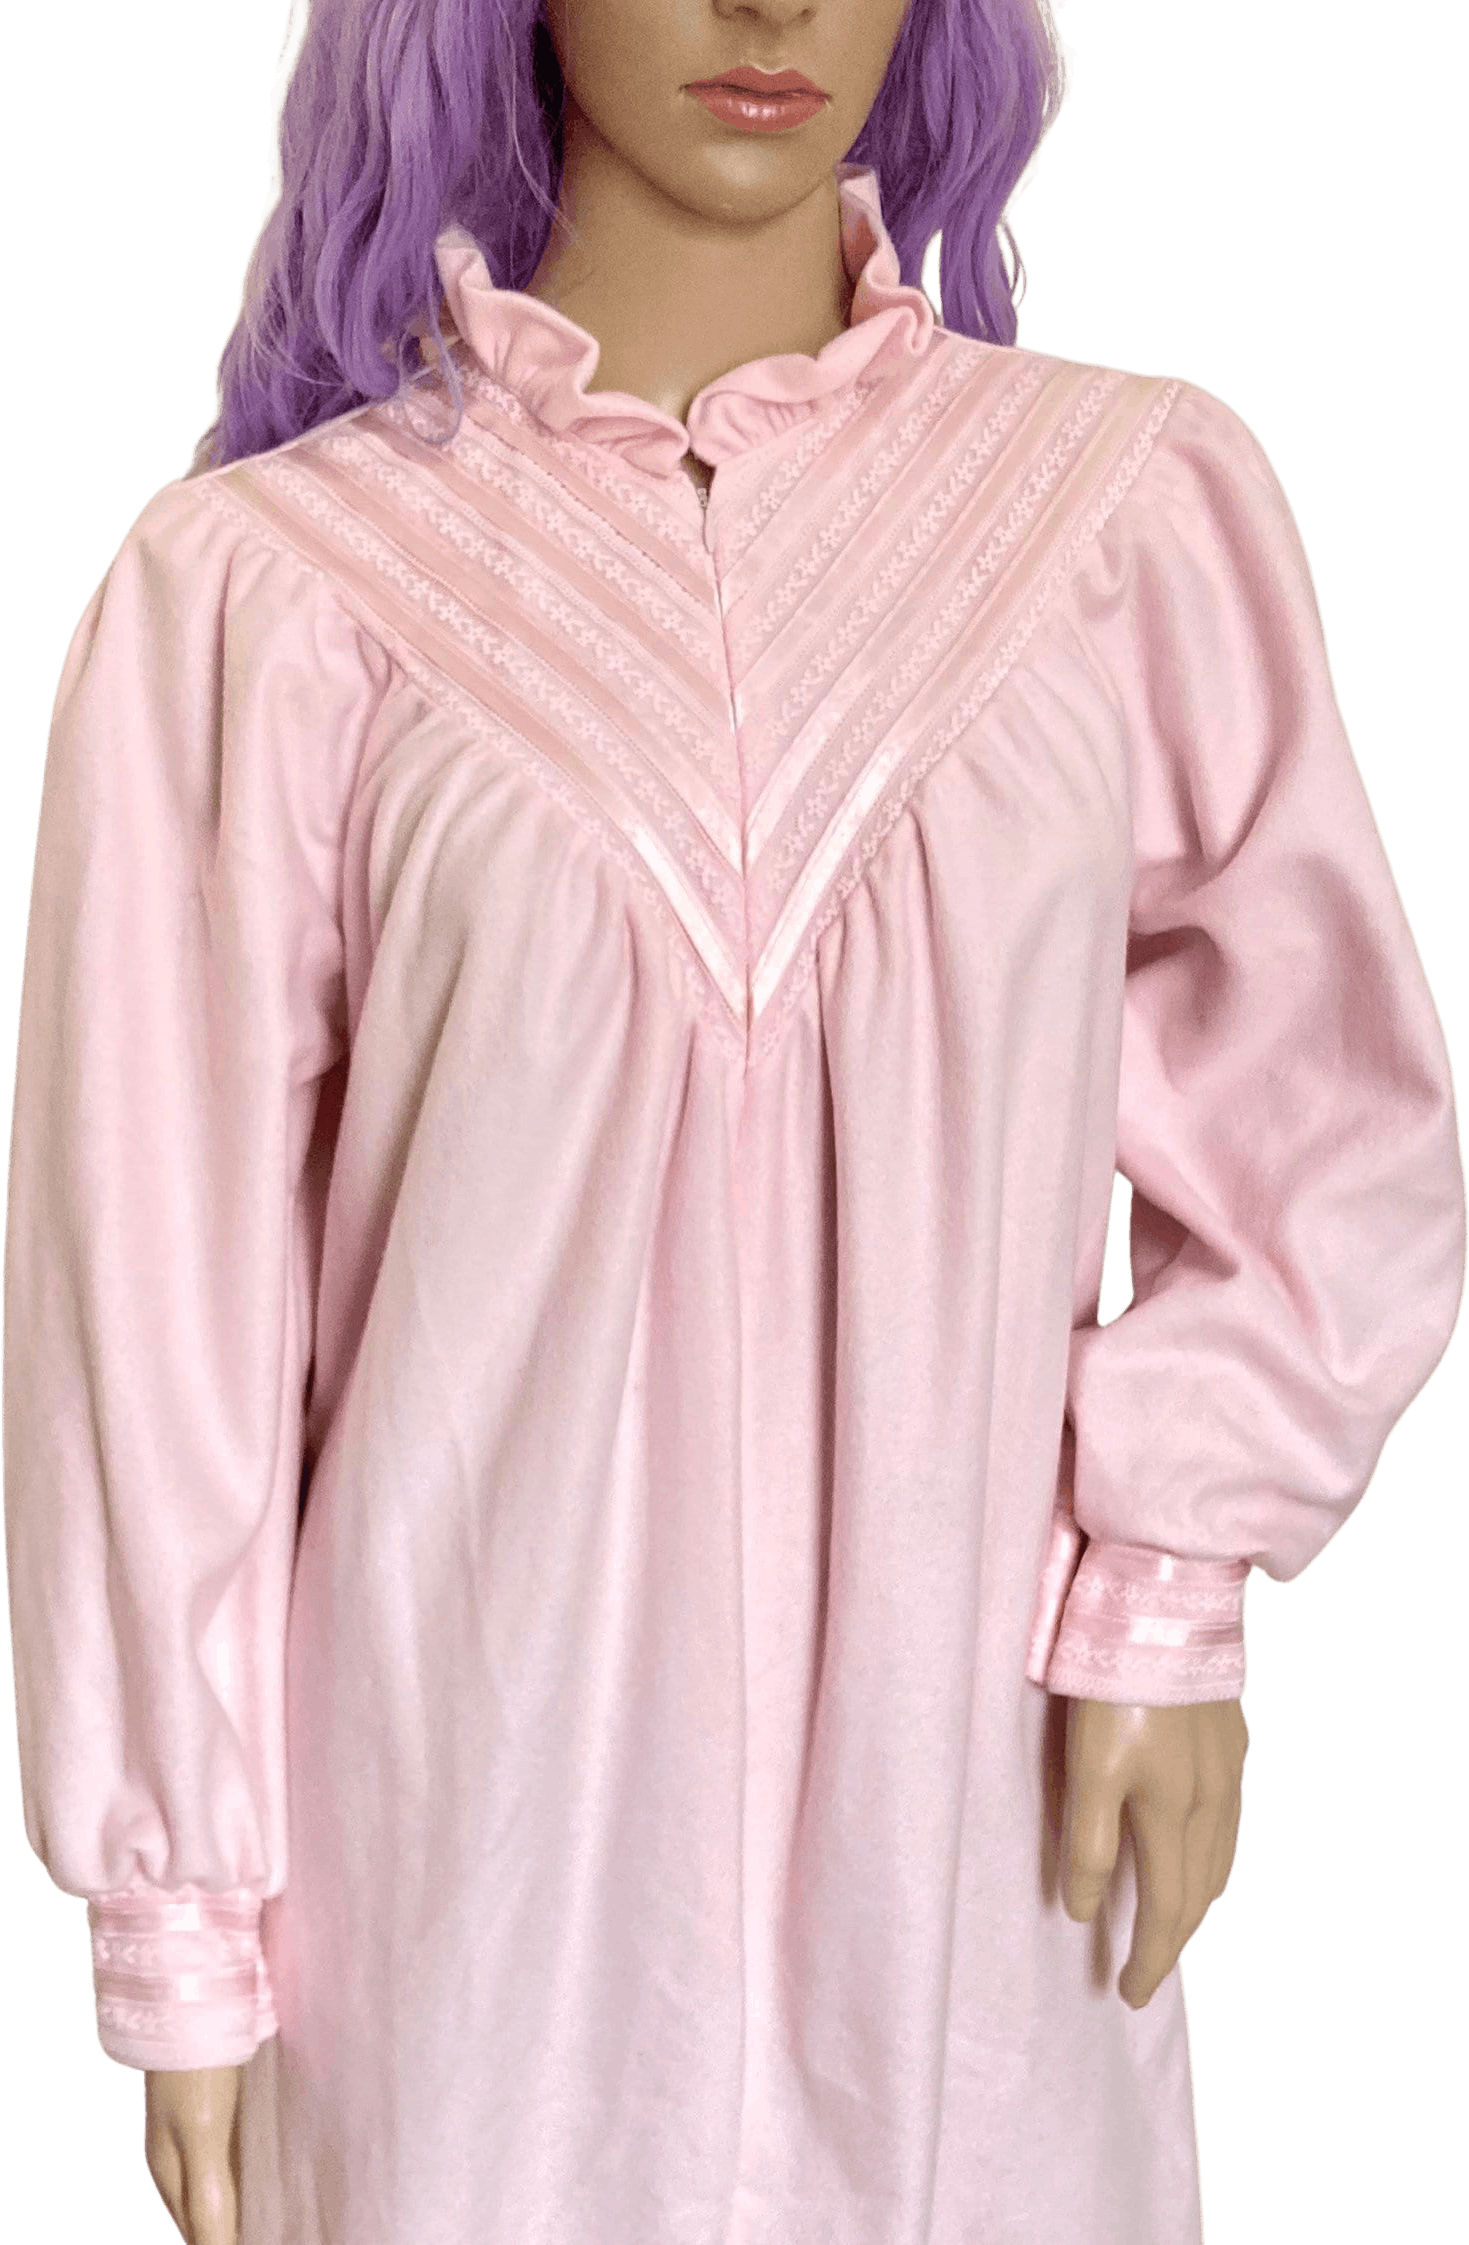 Vintage 80s Victorian Inspired Pink Nightgown Shop Thrilling